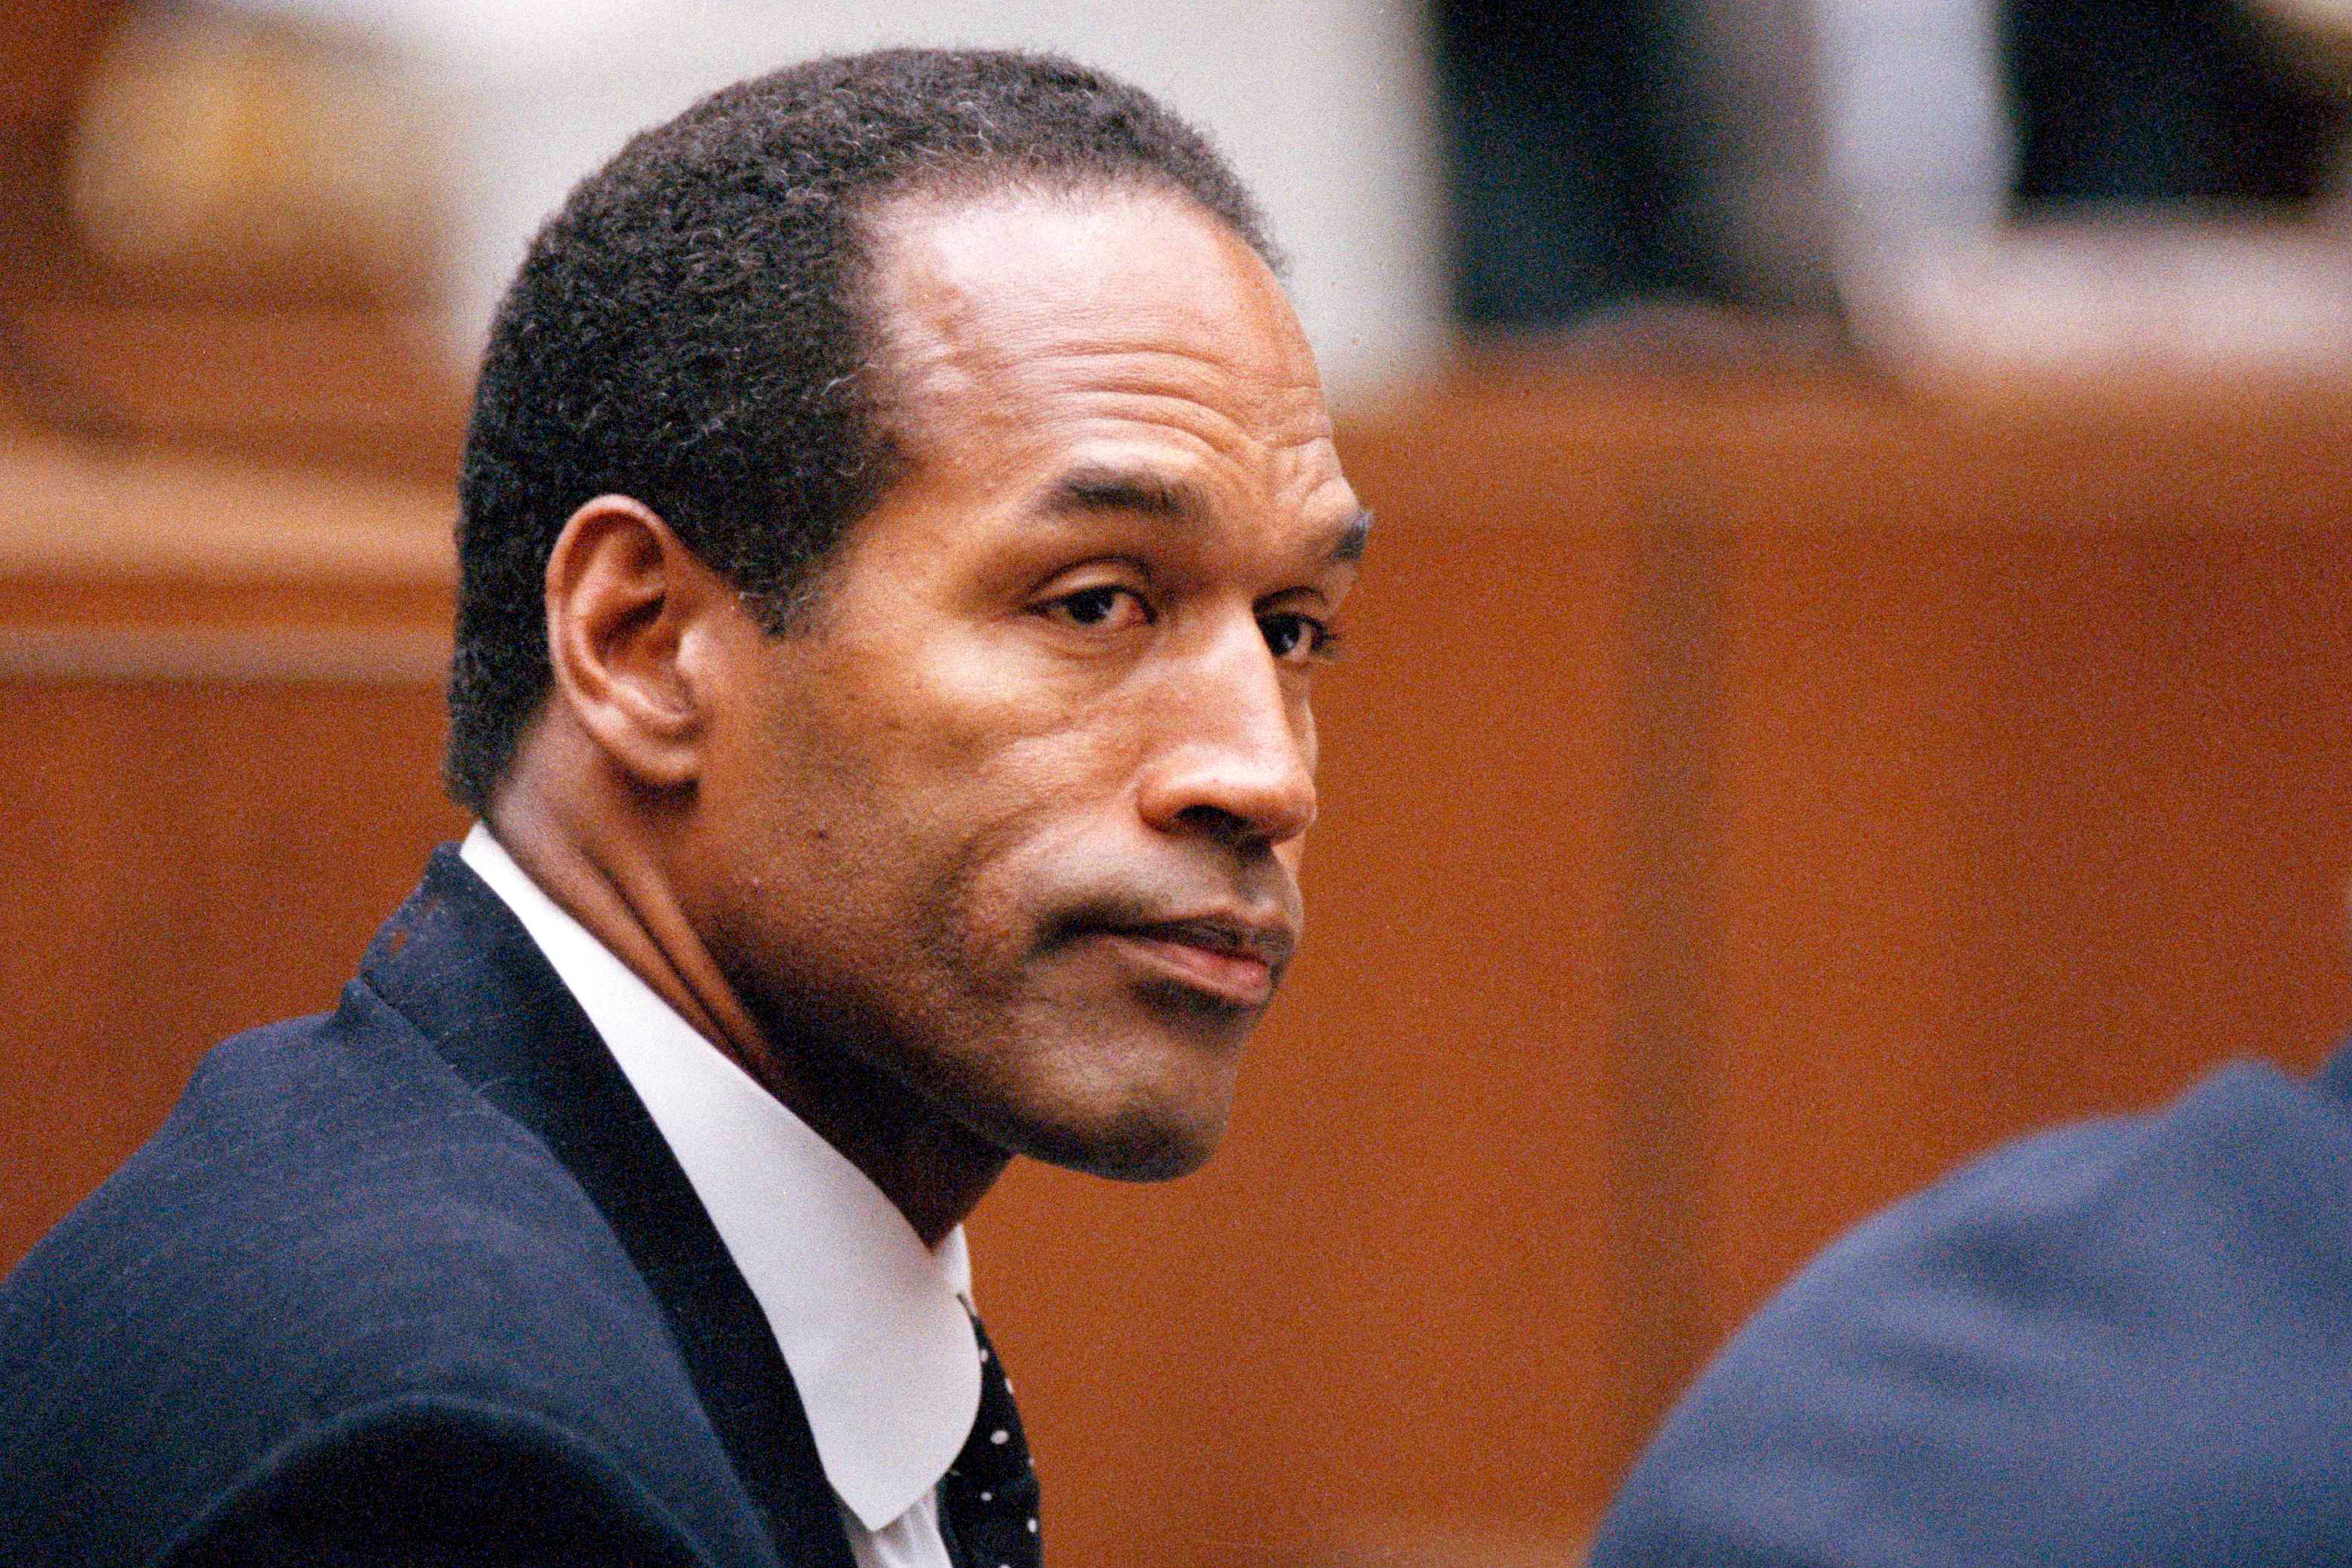 Simpson, pictured in court in 1994, was famously acquitted of criminal charges alleging he stabbed his ex-wife and her friend, Ronald Goldman, to death in Los Angeles